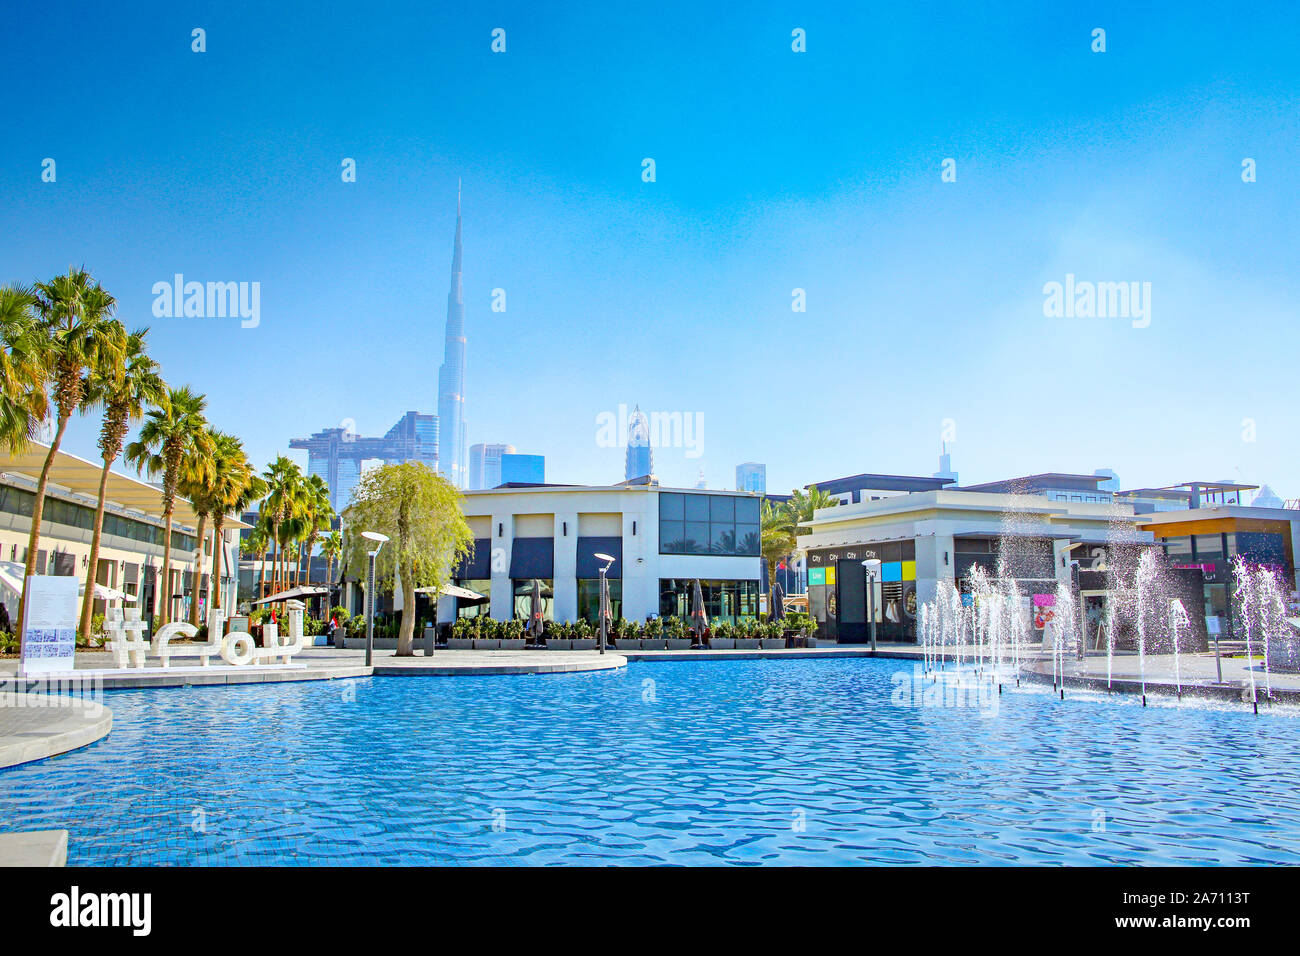 Shopping center in the city with shops surrounding a swimming pool & skyscrappers in the background, Dubai, United Arab Emirates. Stock Photo